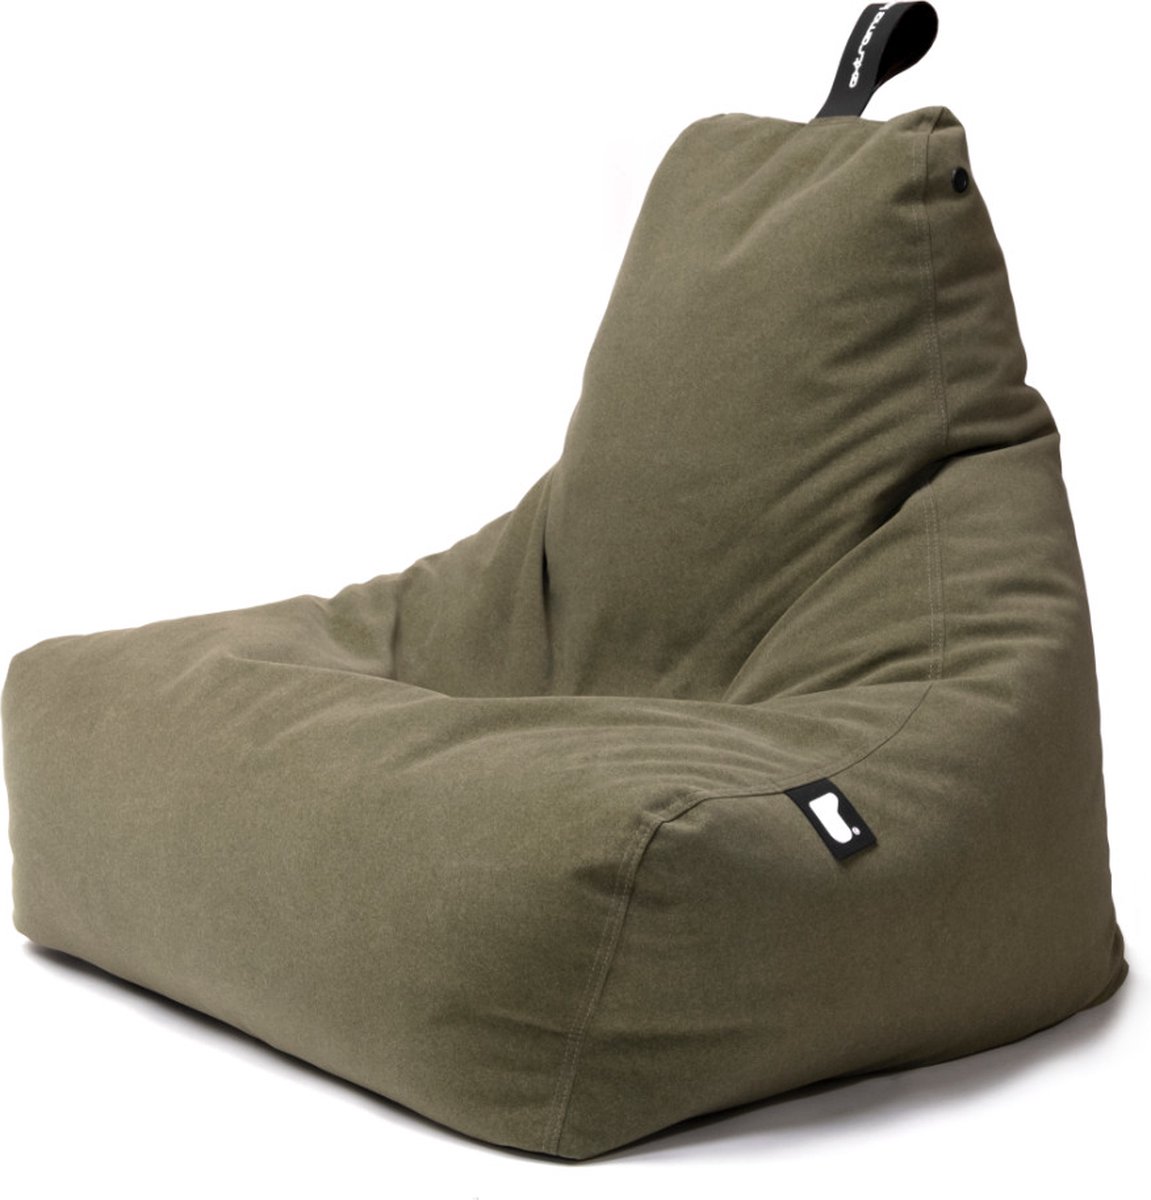 Extreme Lounging - indoor b-bag - mighty-b suede Moss - Groen